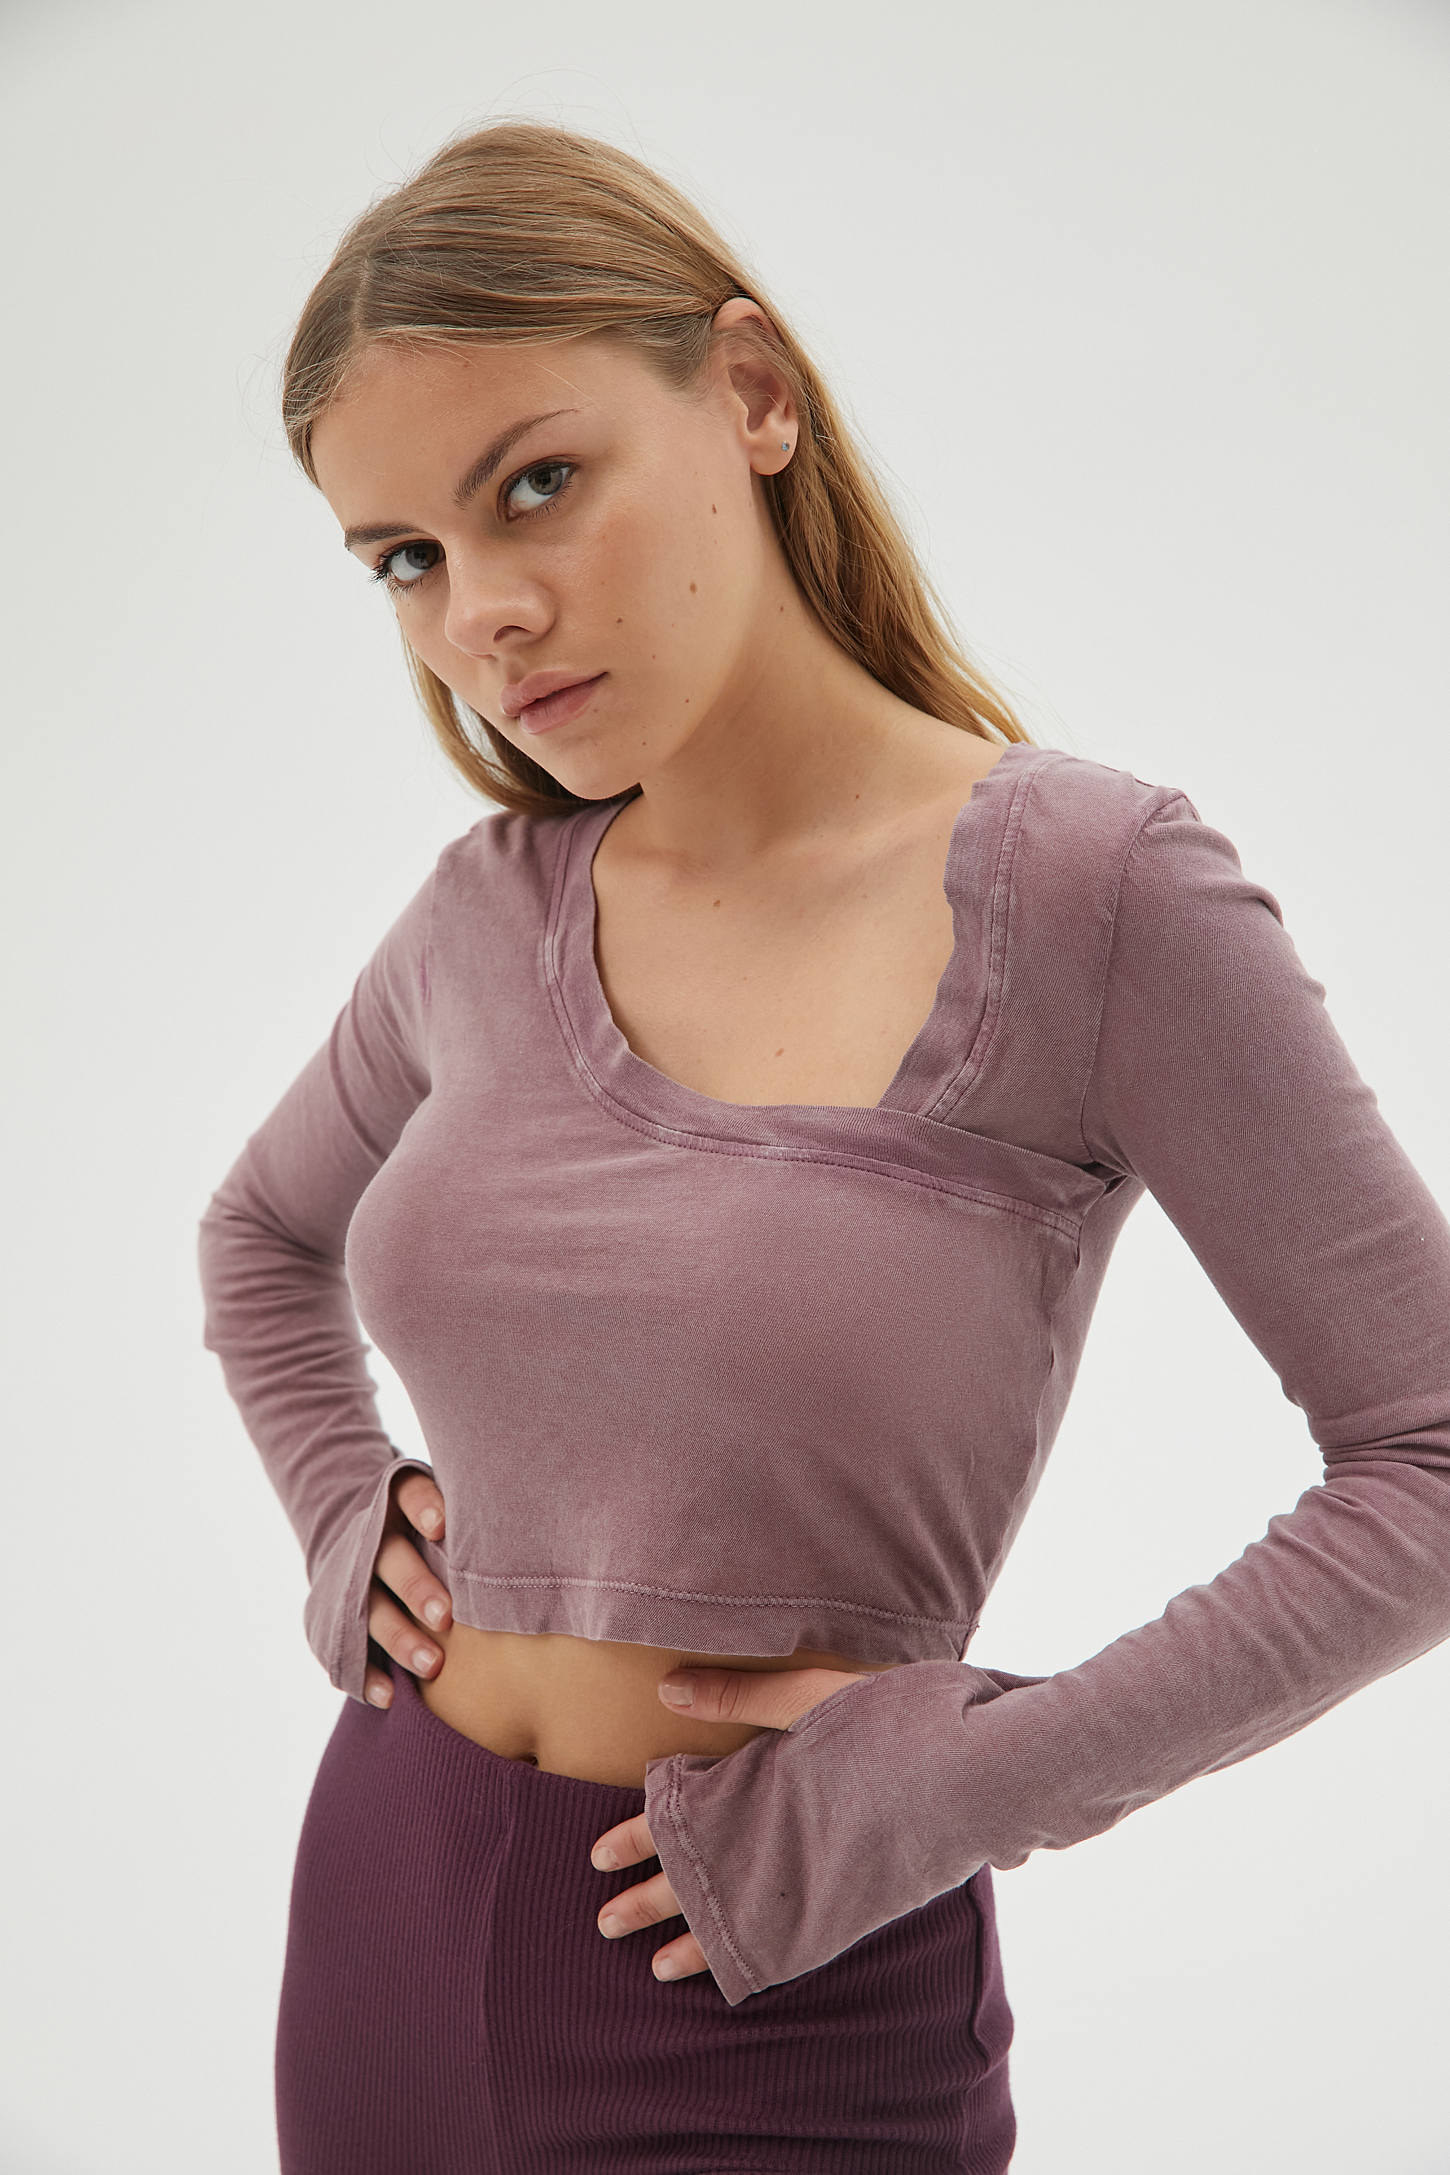 A model wearing the cropped shirt with asymmetric neckline in pink 